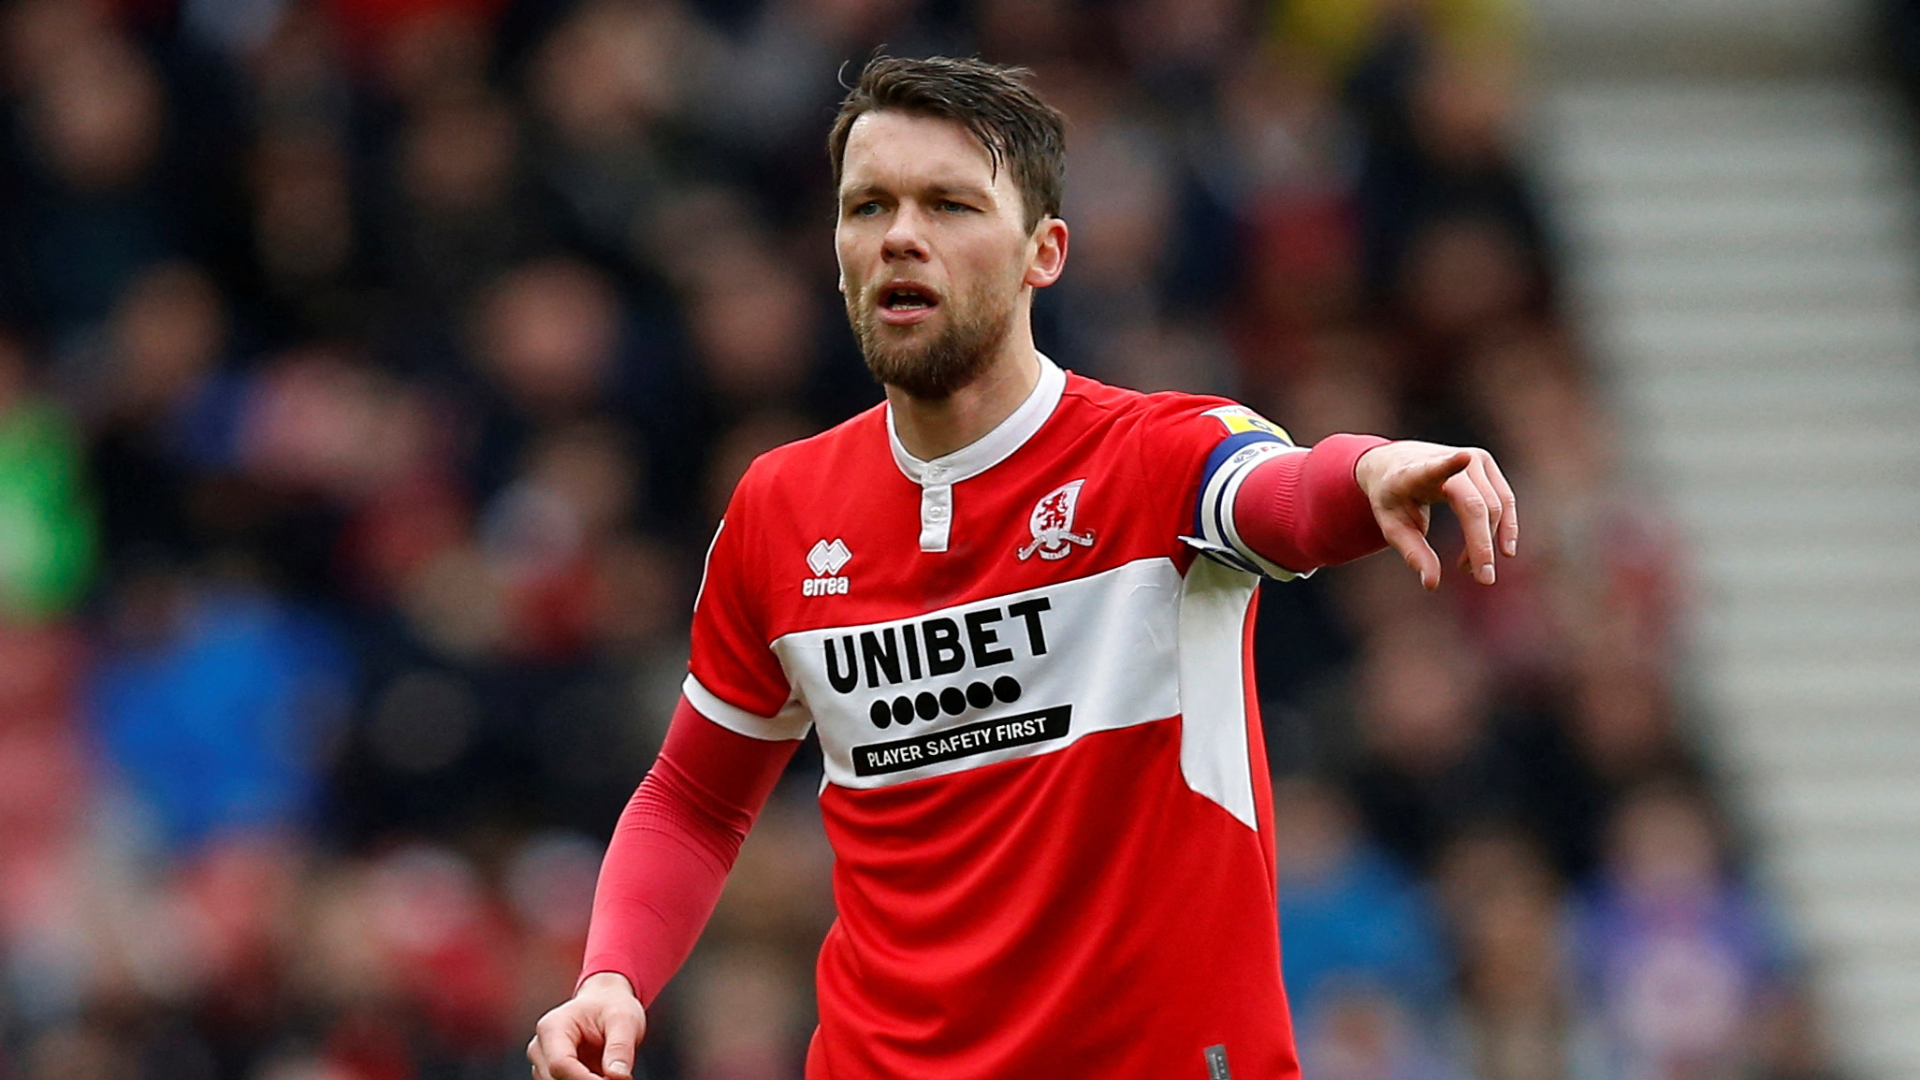 Jonny Howson playing for Middlesbrough FC